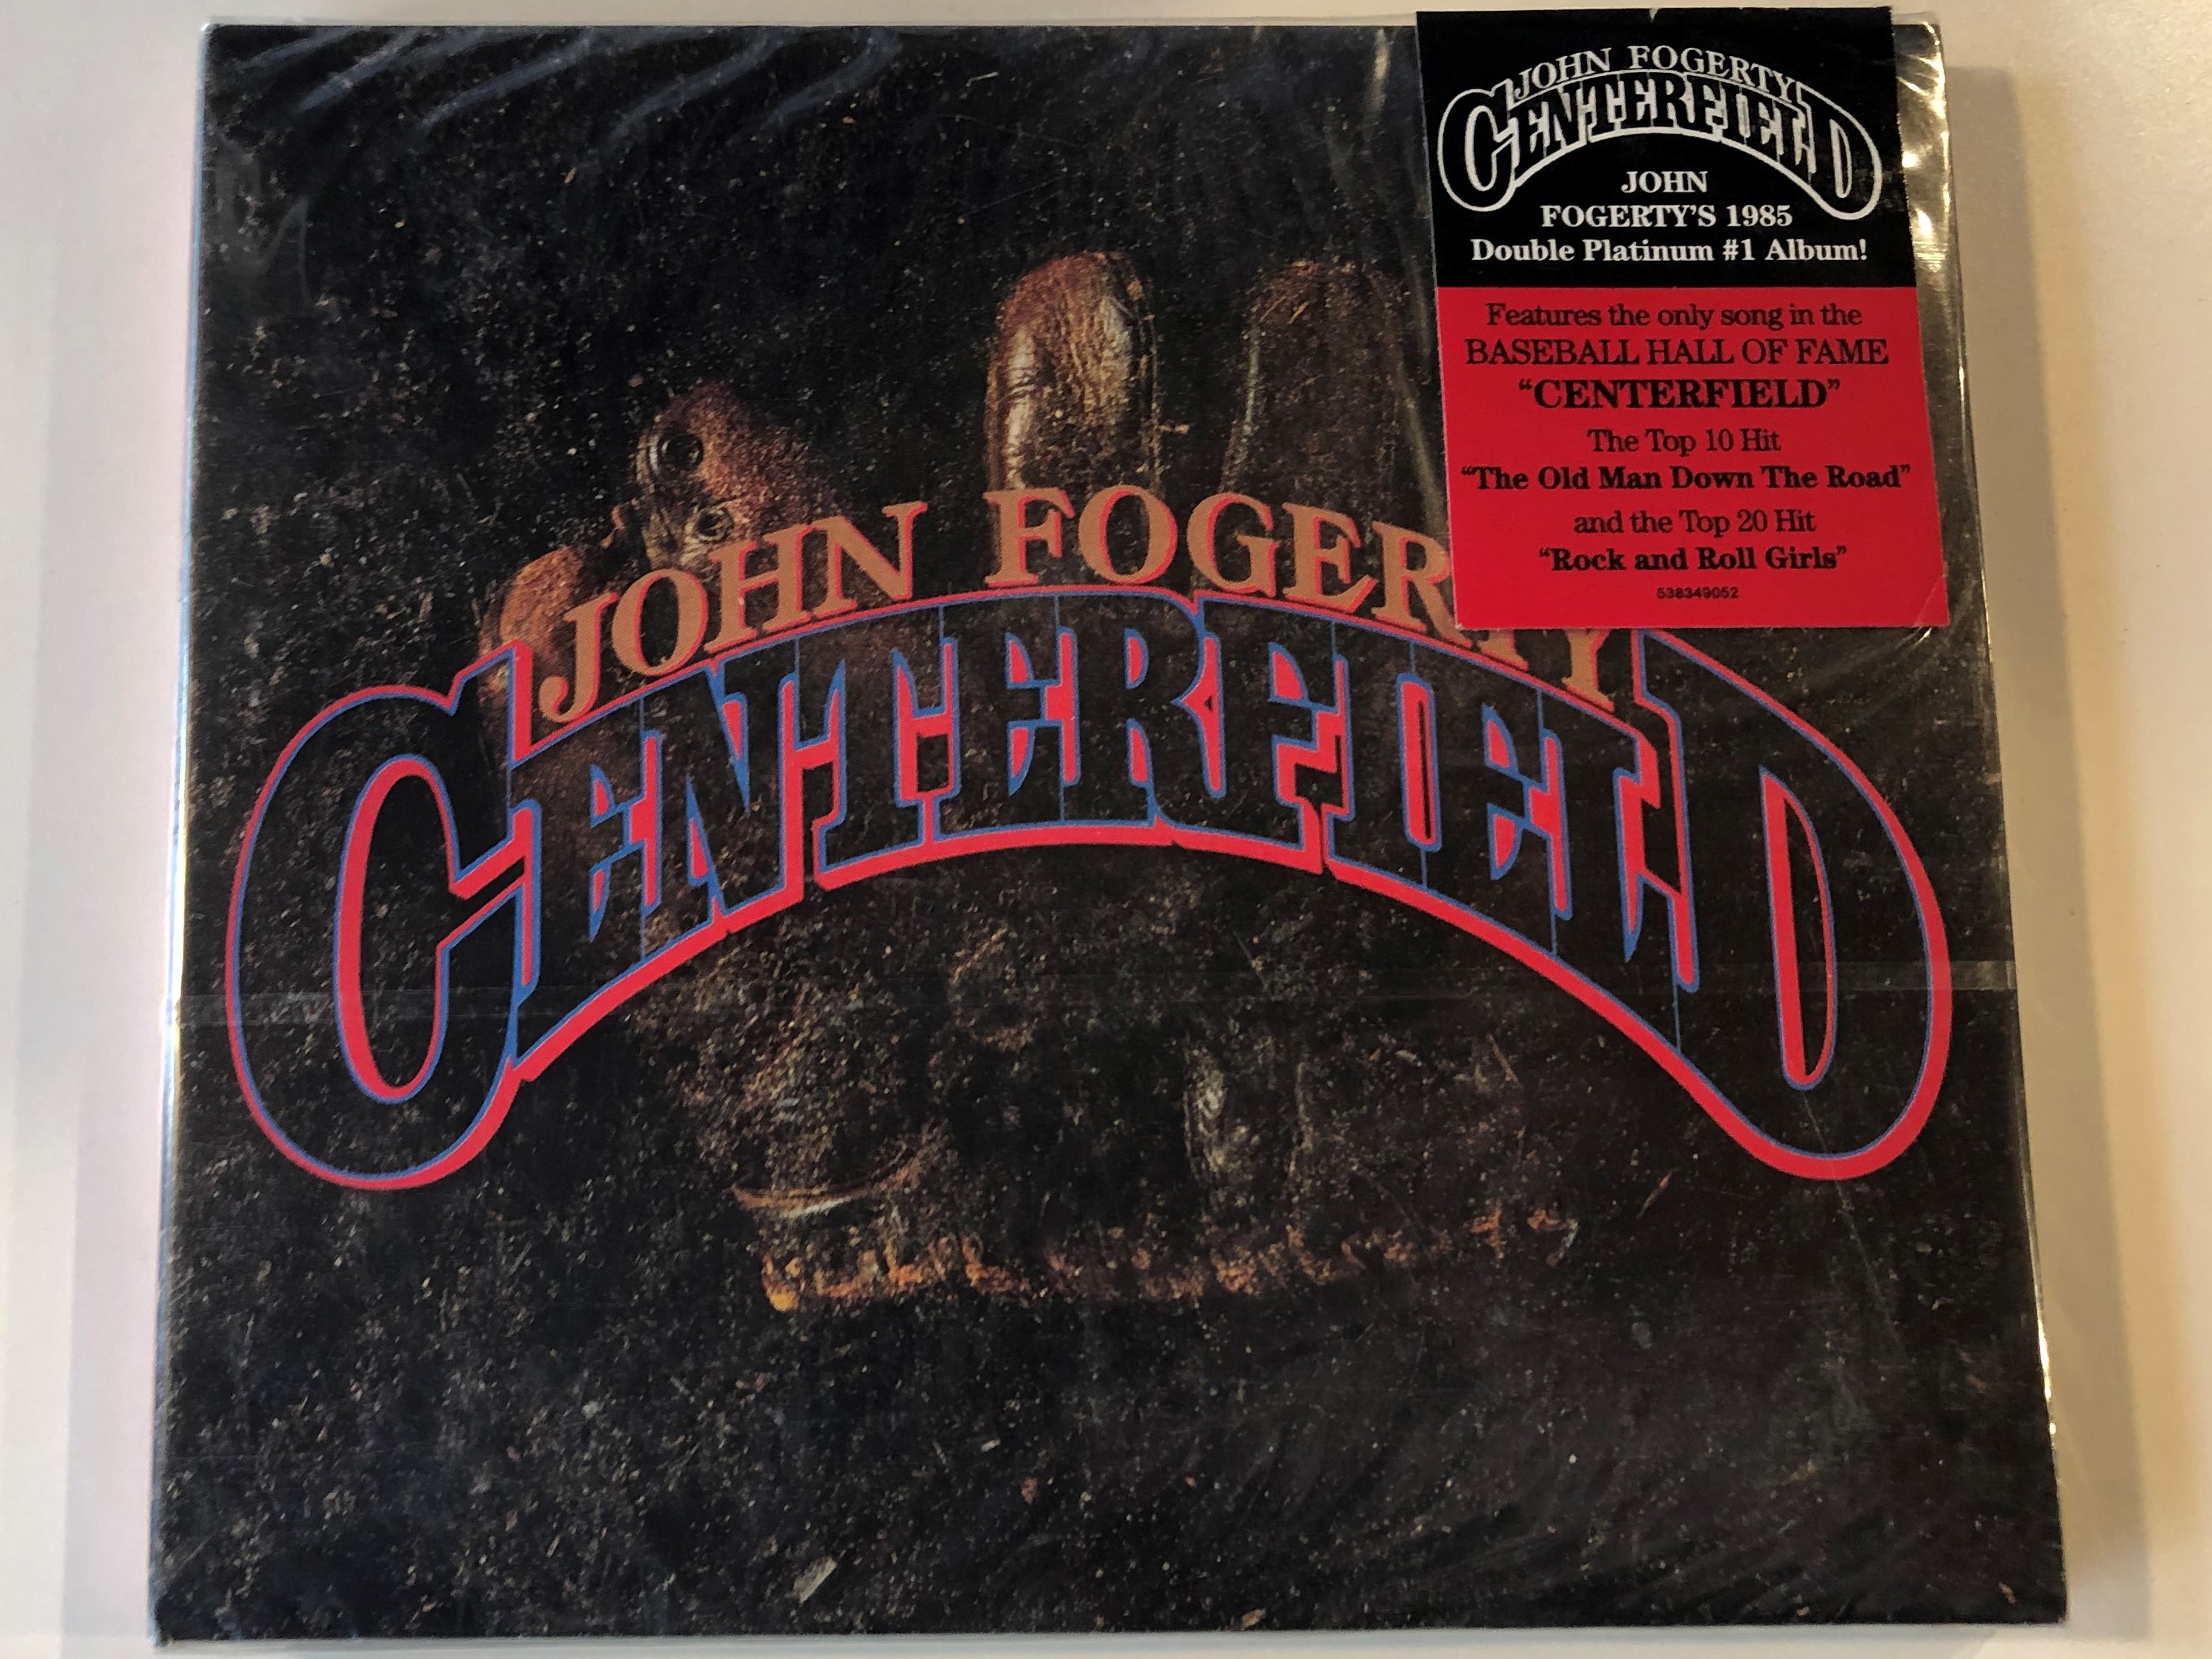 john-fogerty-centerfield-features-the-only-song-in-the-baseball-hall-of-fame-centerfield-the-top-10-hit-the-old-man-down-the-road-and-the-top-20-hit-rock-and-roll-girls-bmg-au-1-.jpg